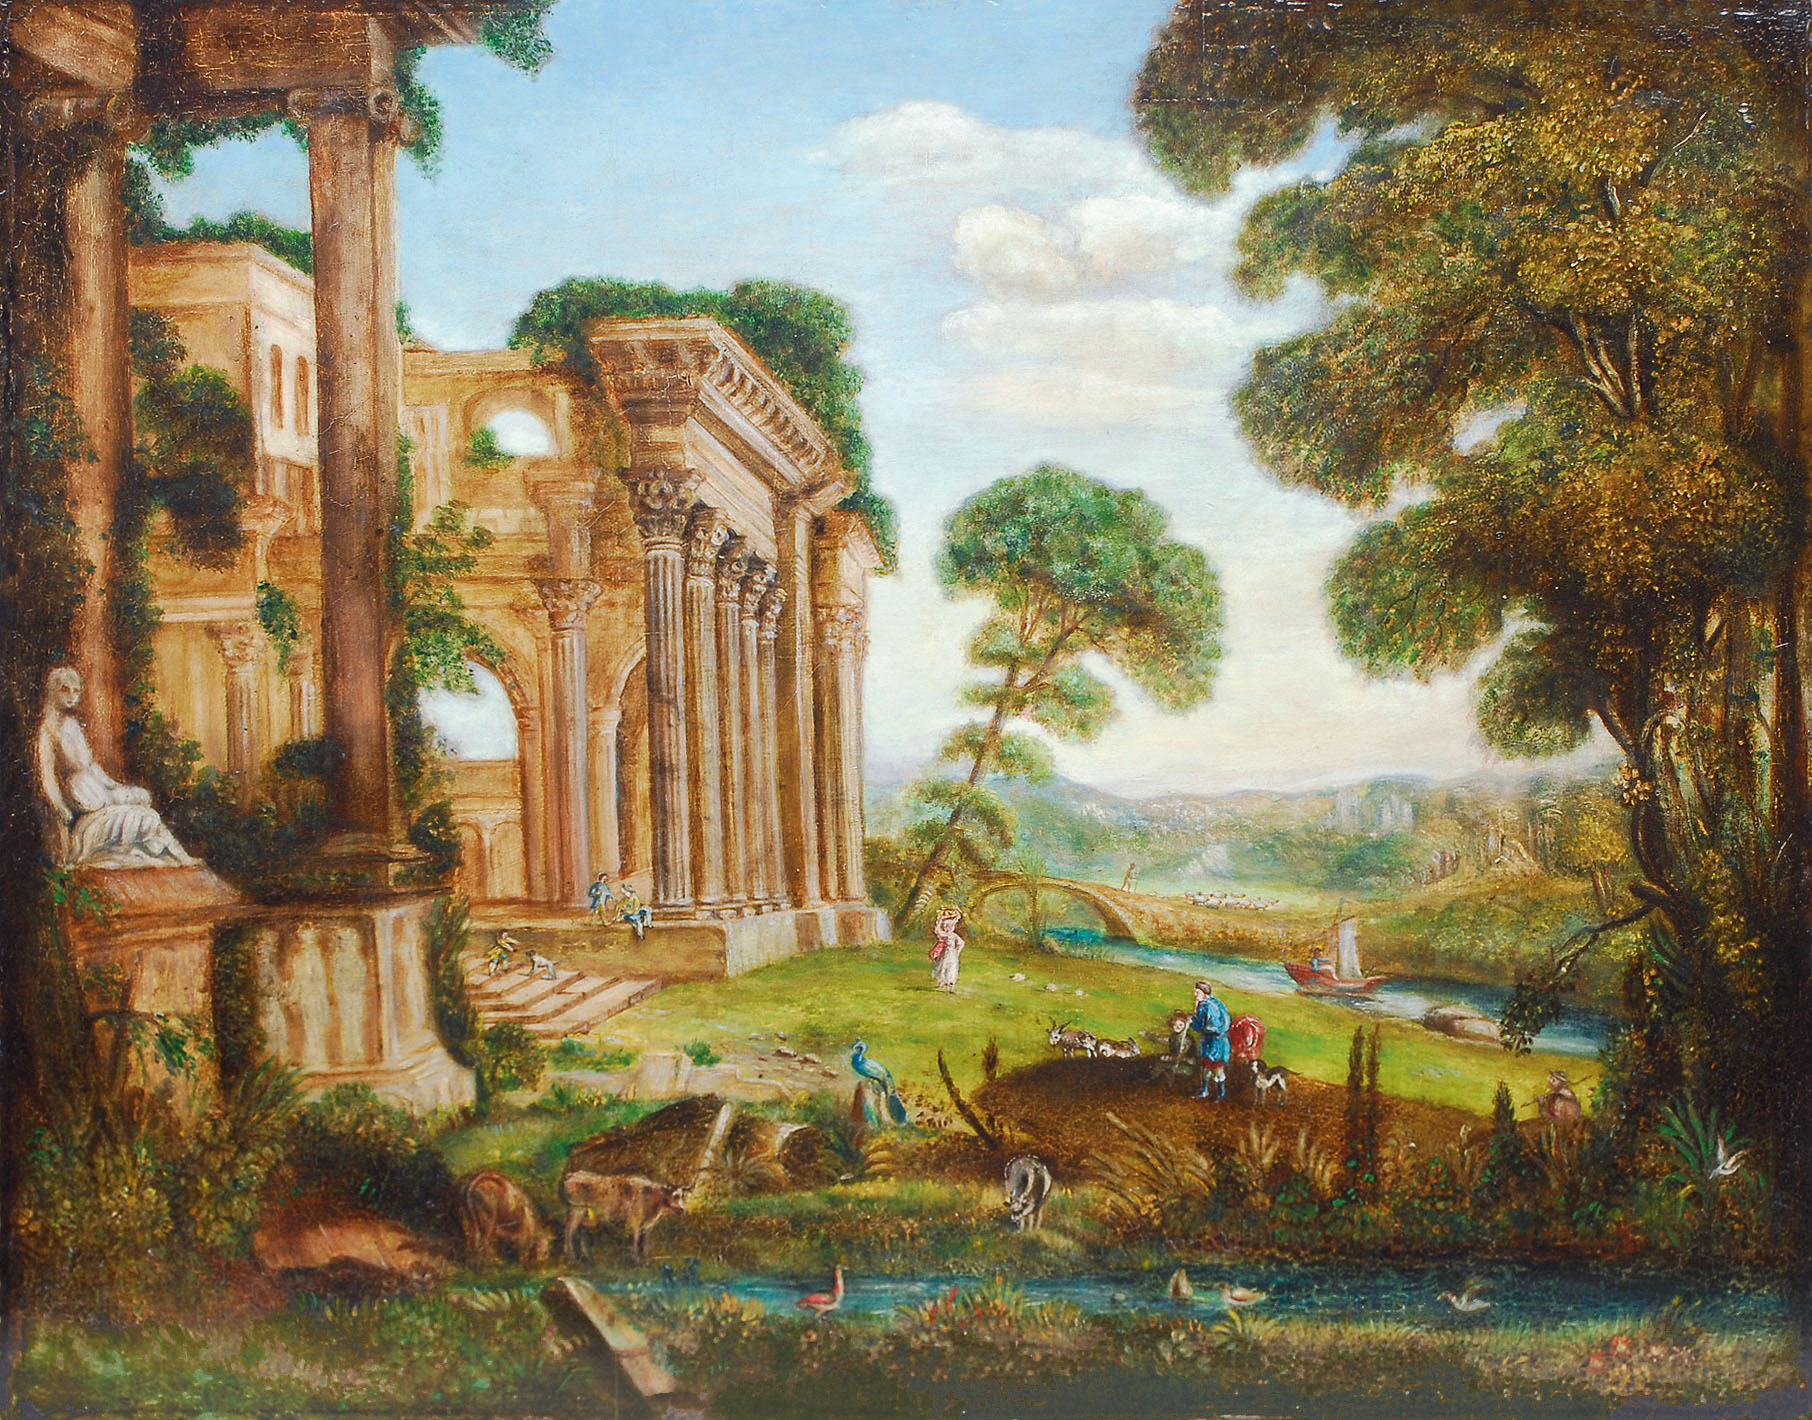 Fantastic landscape with a palace ruin